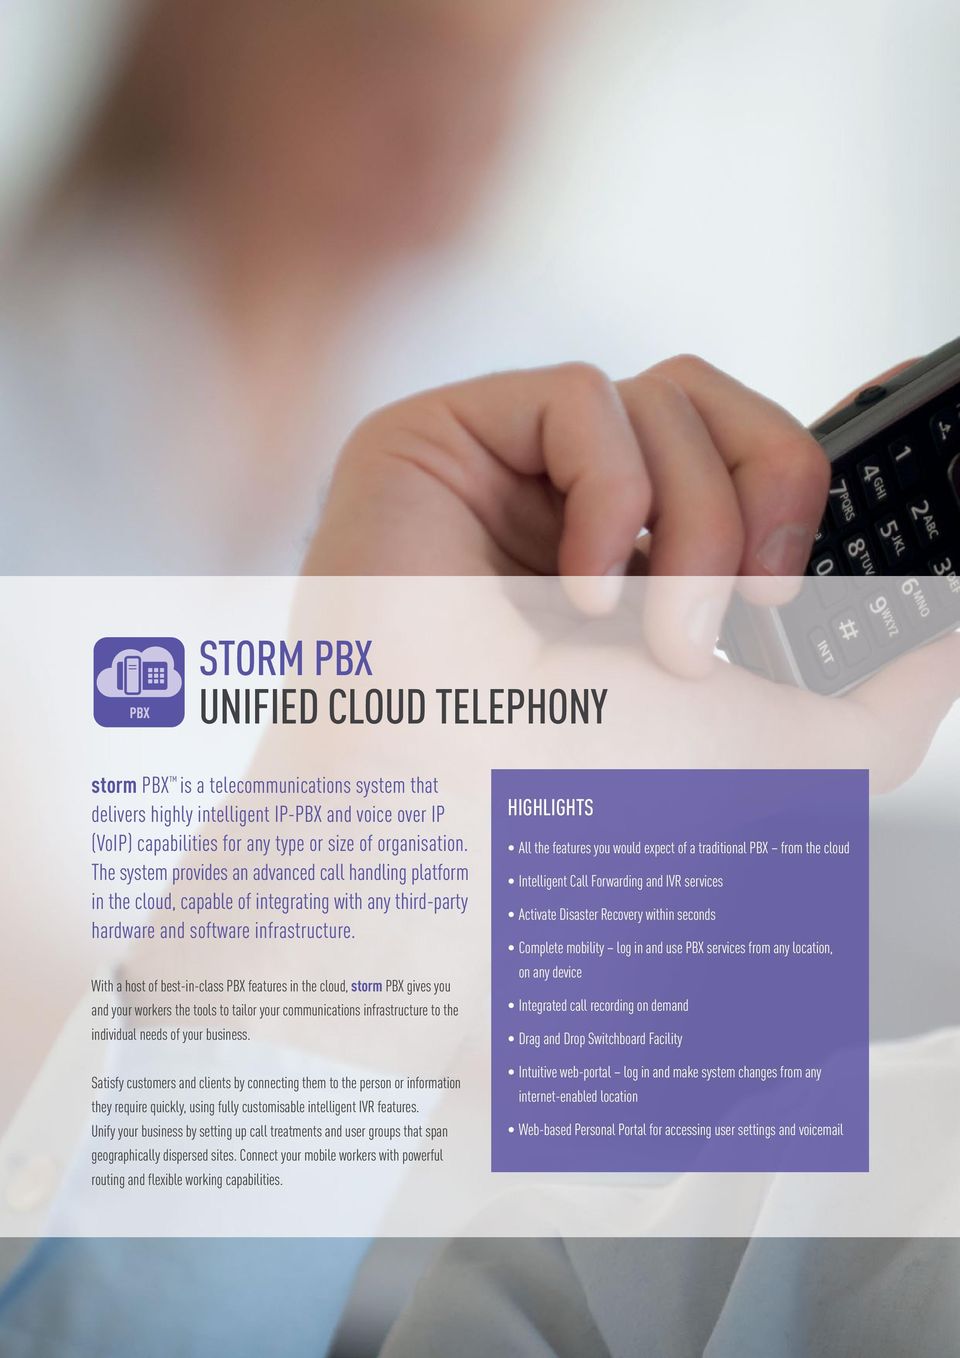 With a host of best-in-class PBX features in the cloud, storm PBX gives you and your workers the tools to tailor your communications infrastructure to the individual needs of your business.